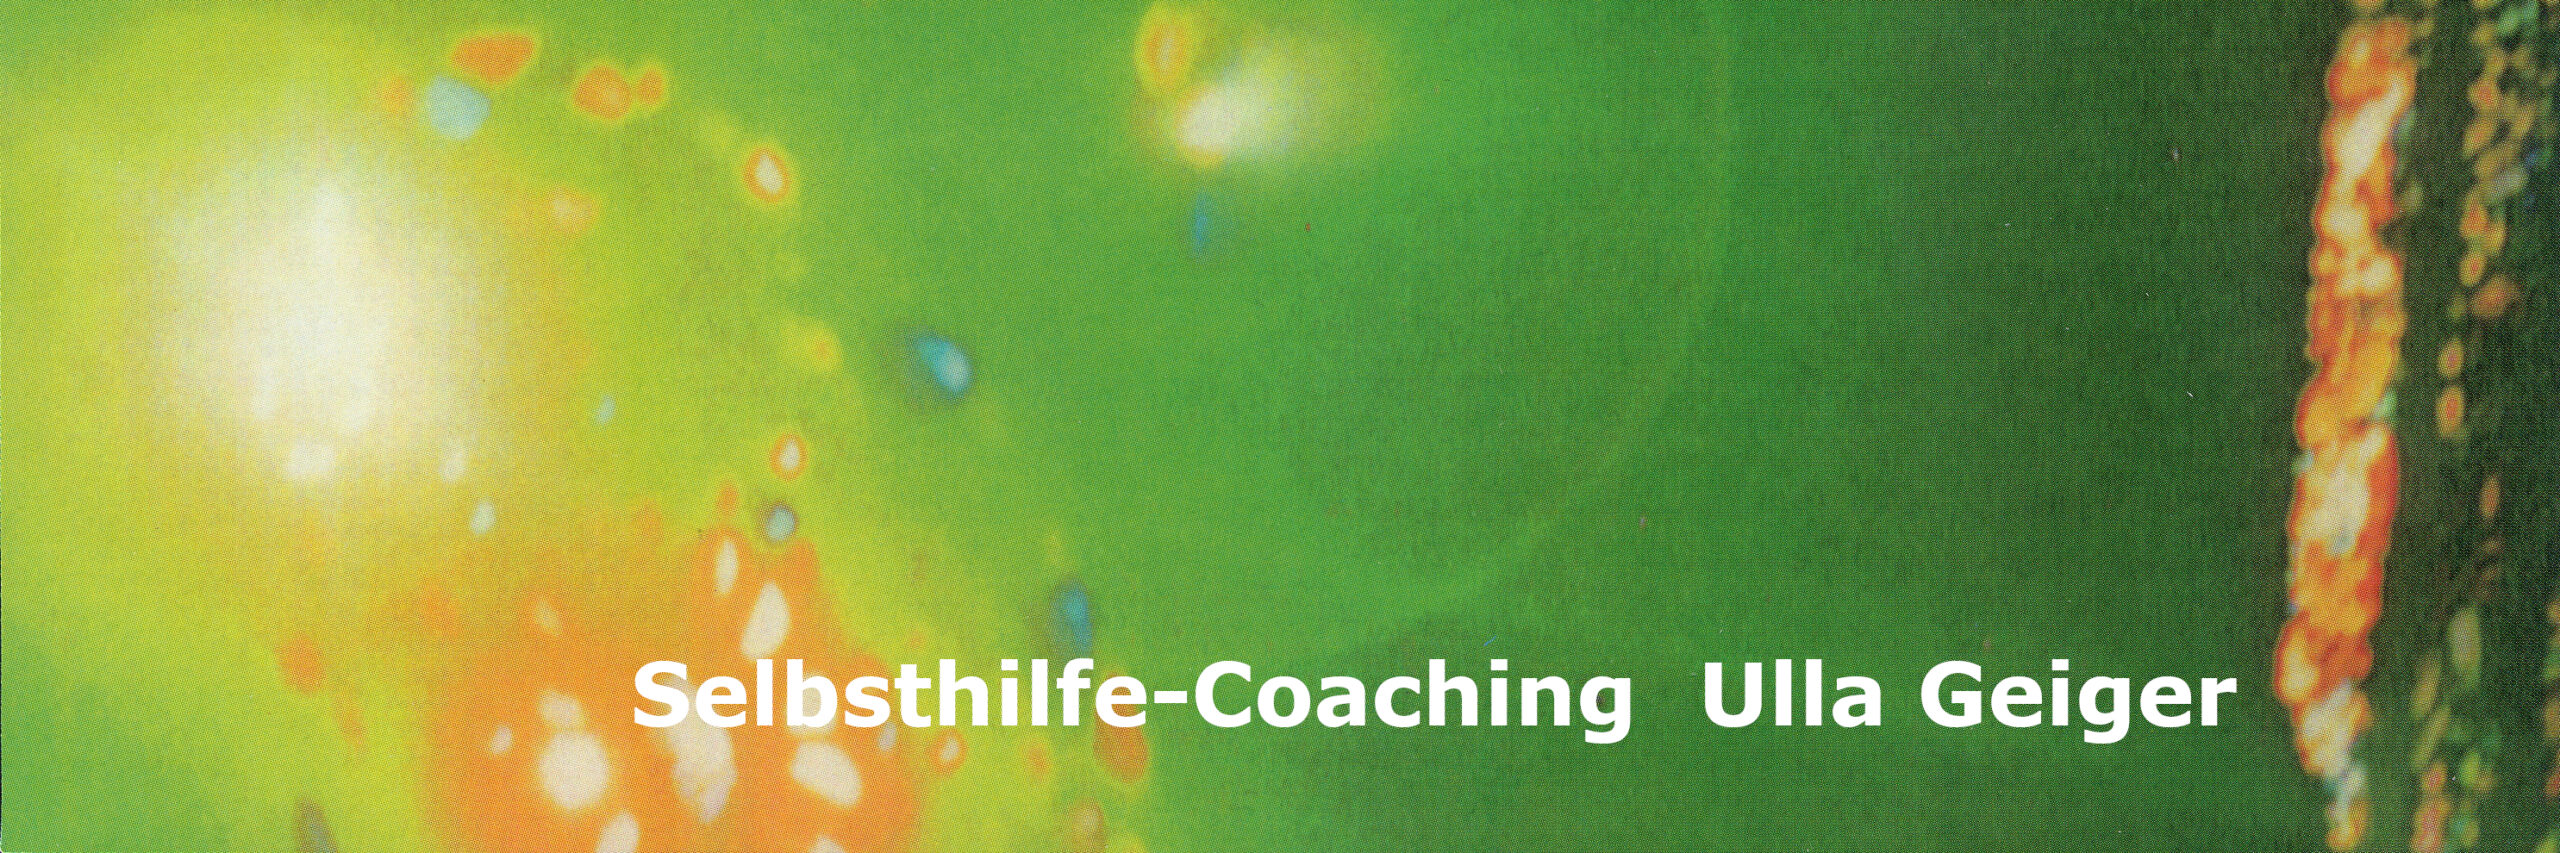 Selbsthilfe-Coaching Ulla Geiger